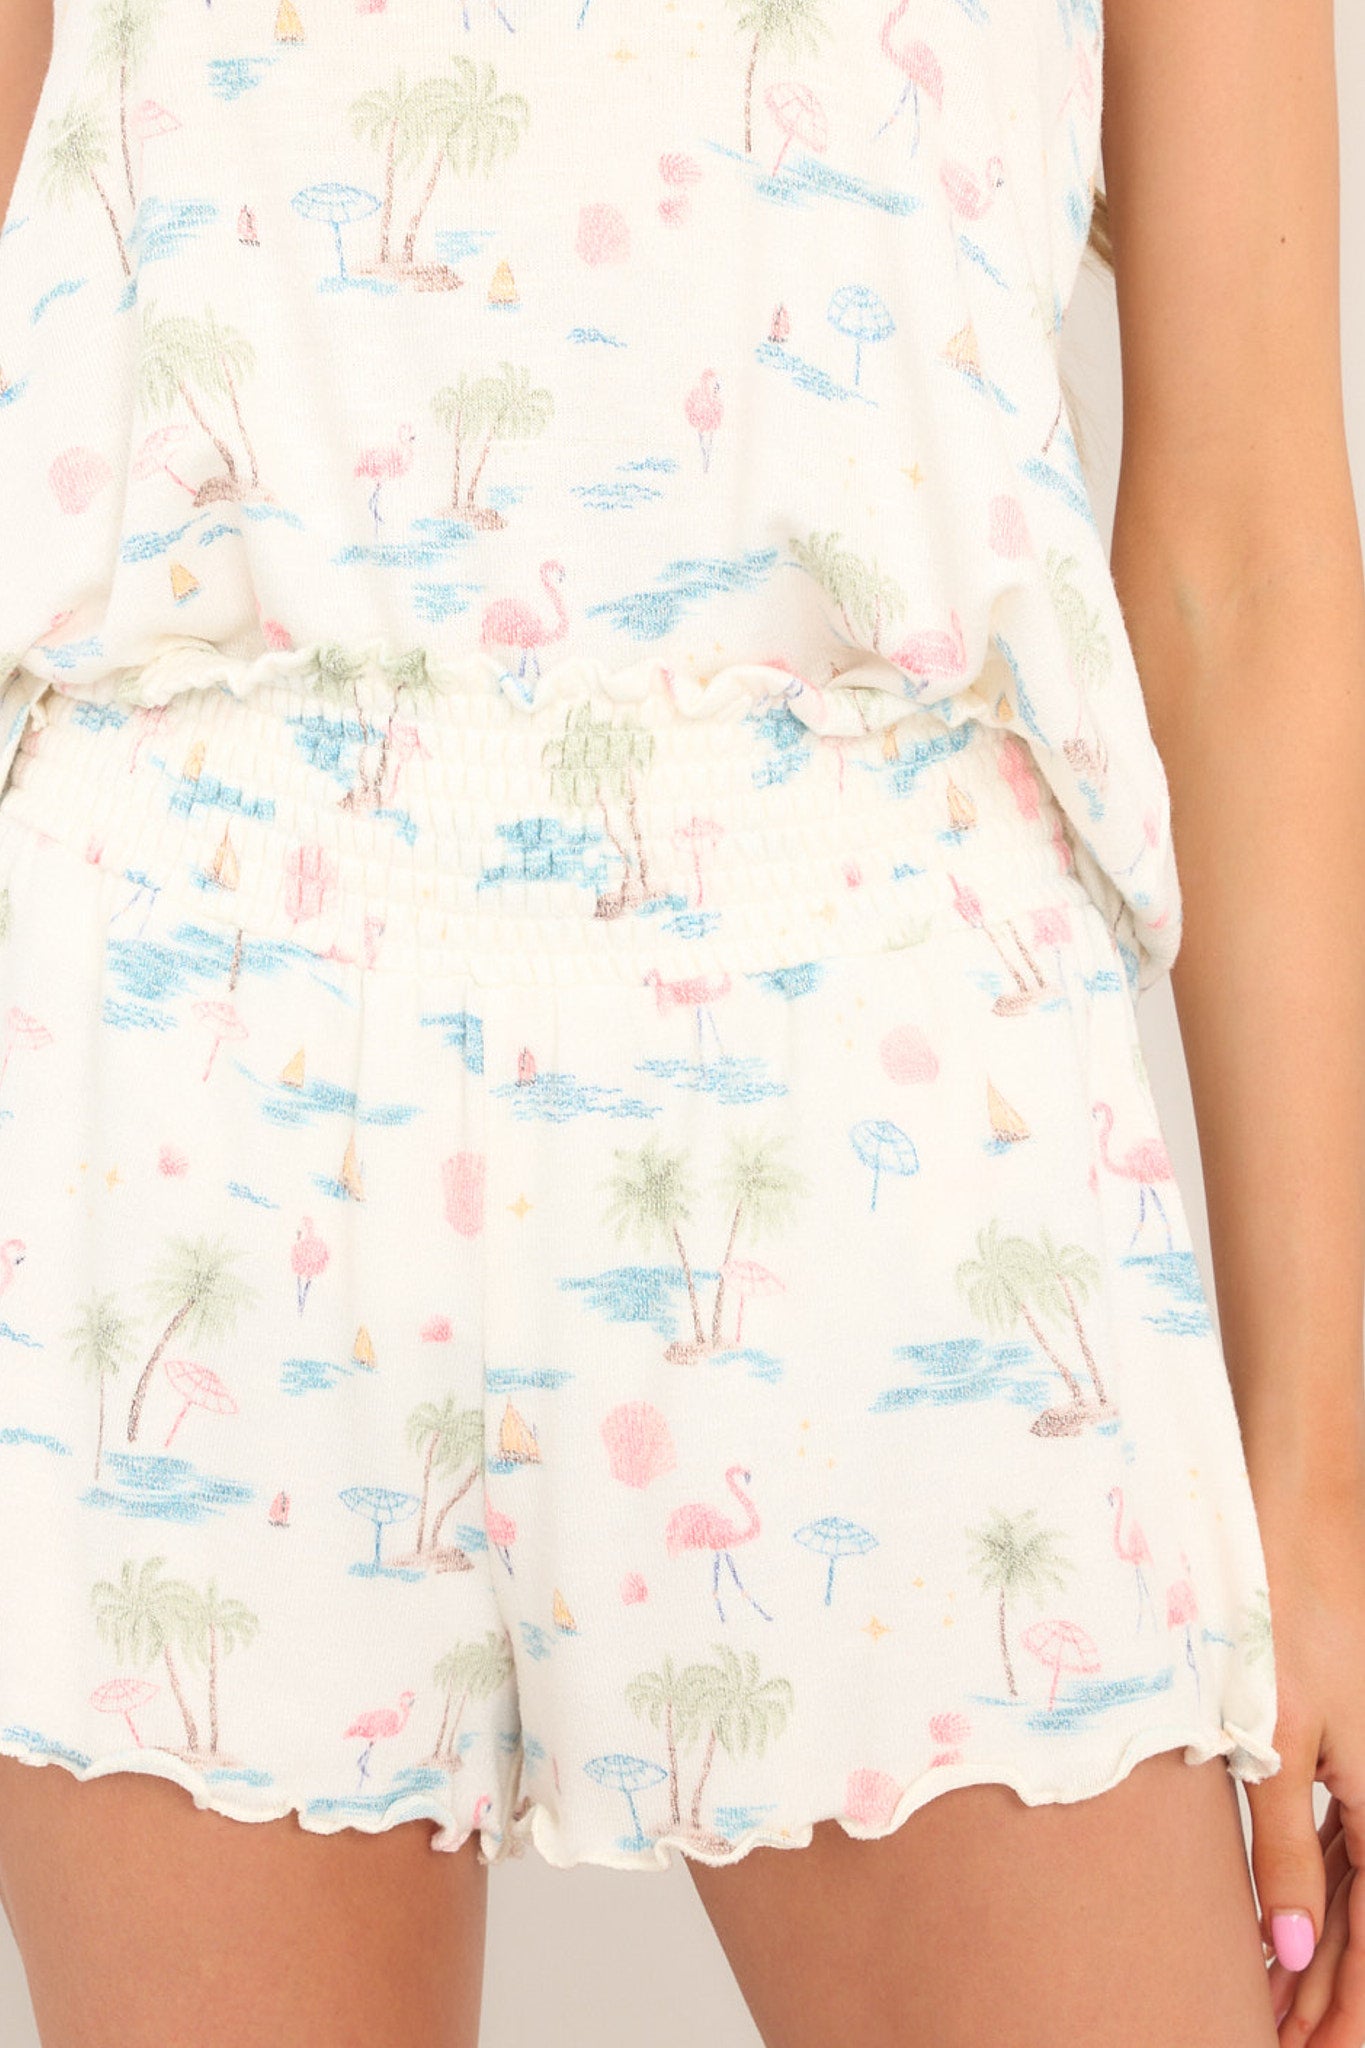 Close up view of these shorts that feature a high waisted design, a fully smocked waistband, a super soft &amp; lightweight material, a tropical print, and a lettuce trim hemline.